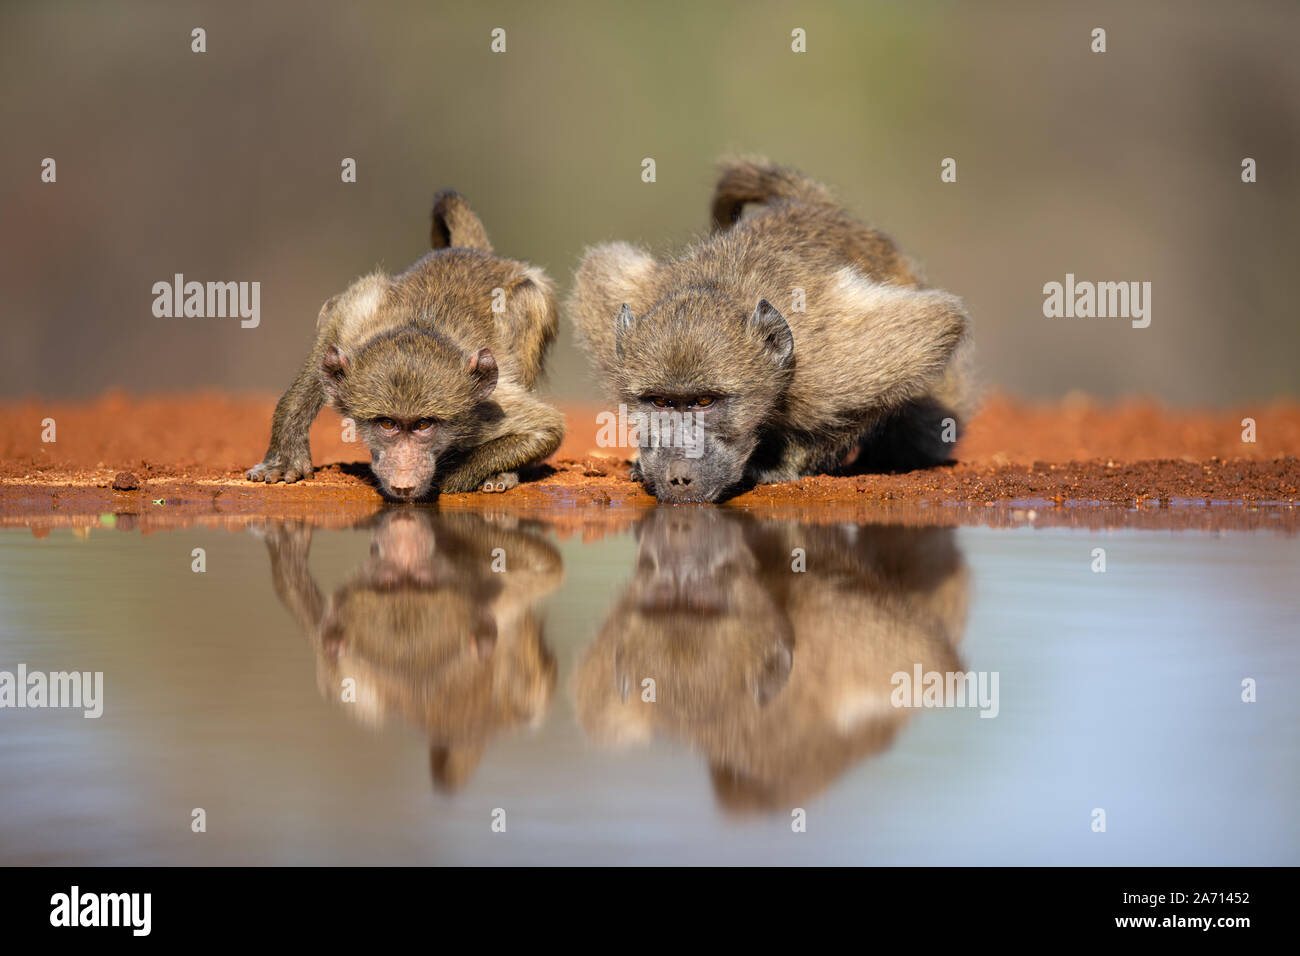 Two Chacma Baboons (Papio ursinus) drinking side by side with reflection, Karongwe Game Reserve, Limpopo, South Africa Stock Photo